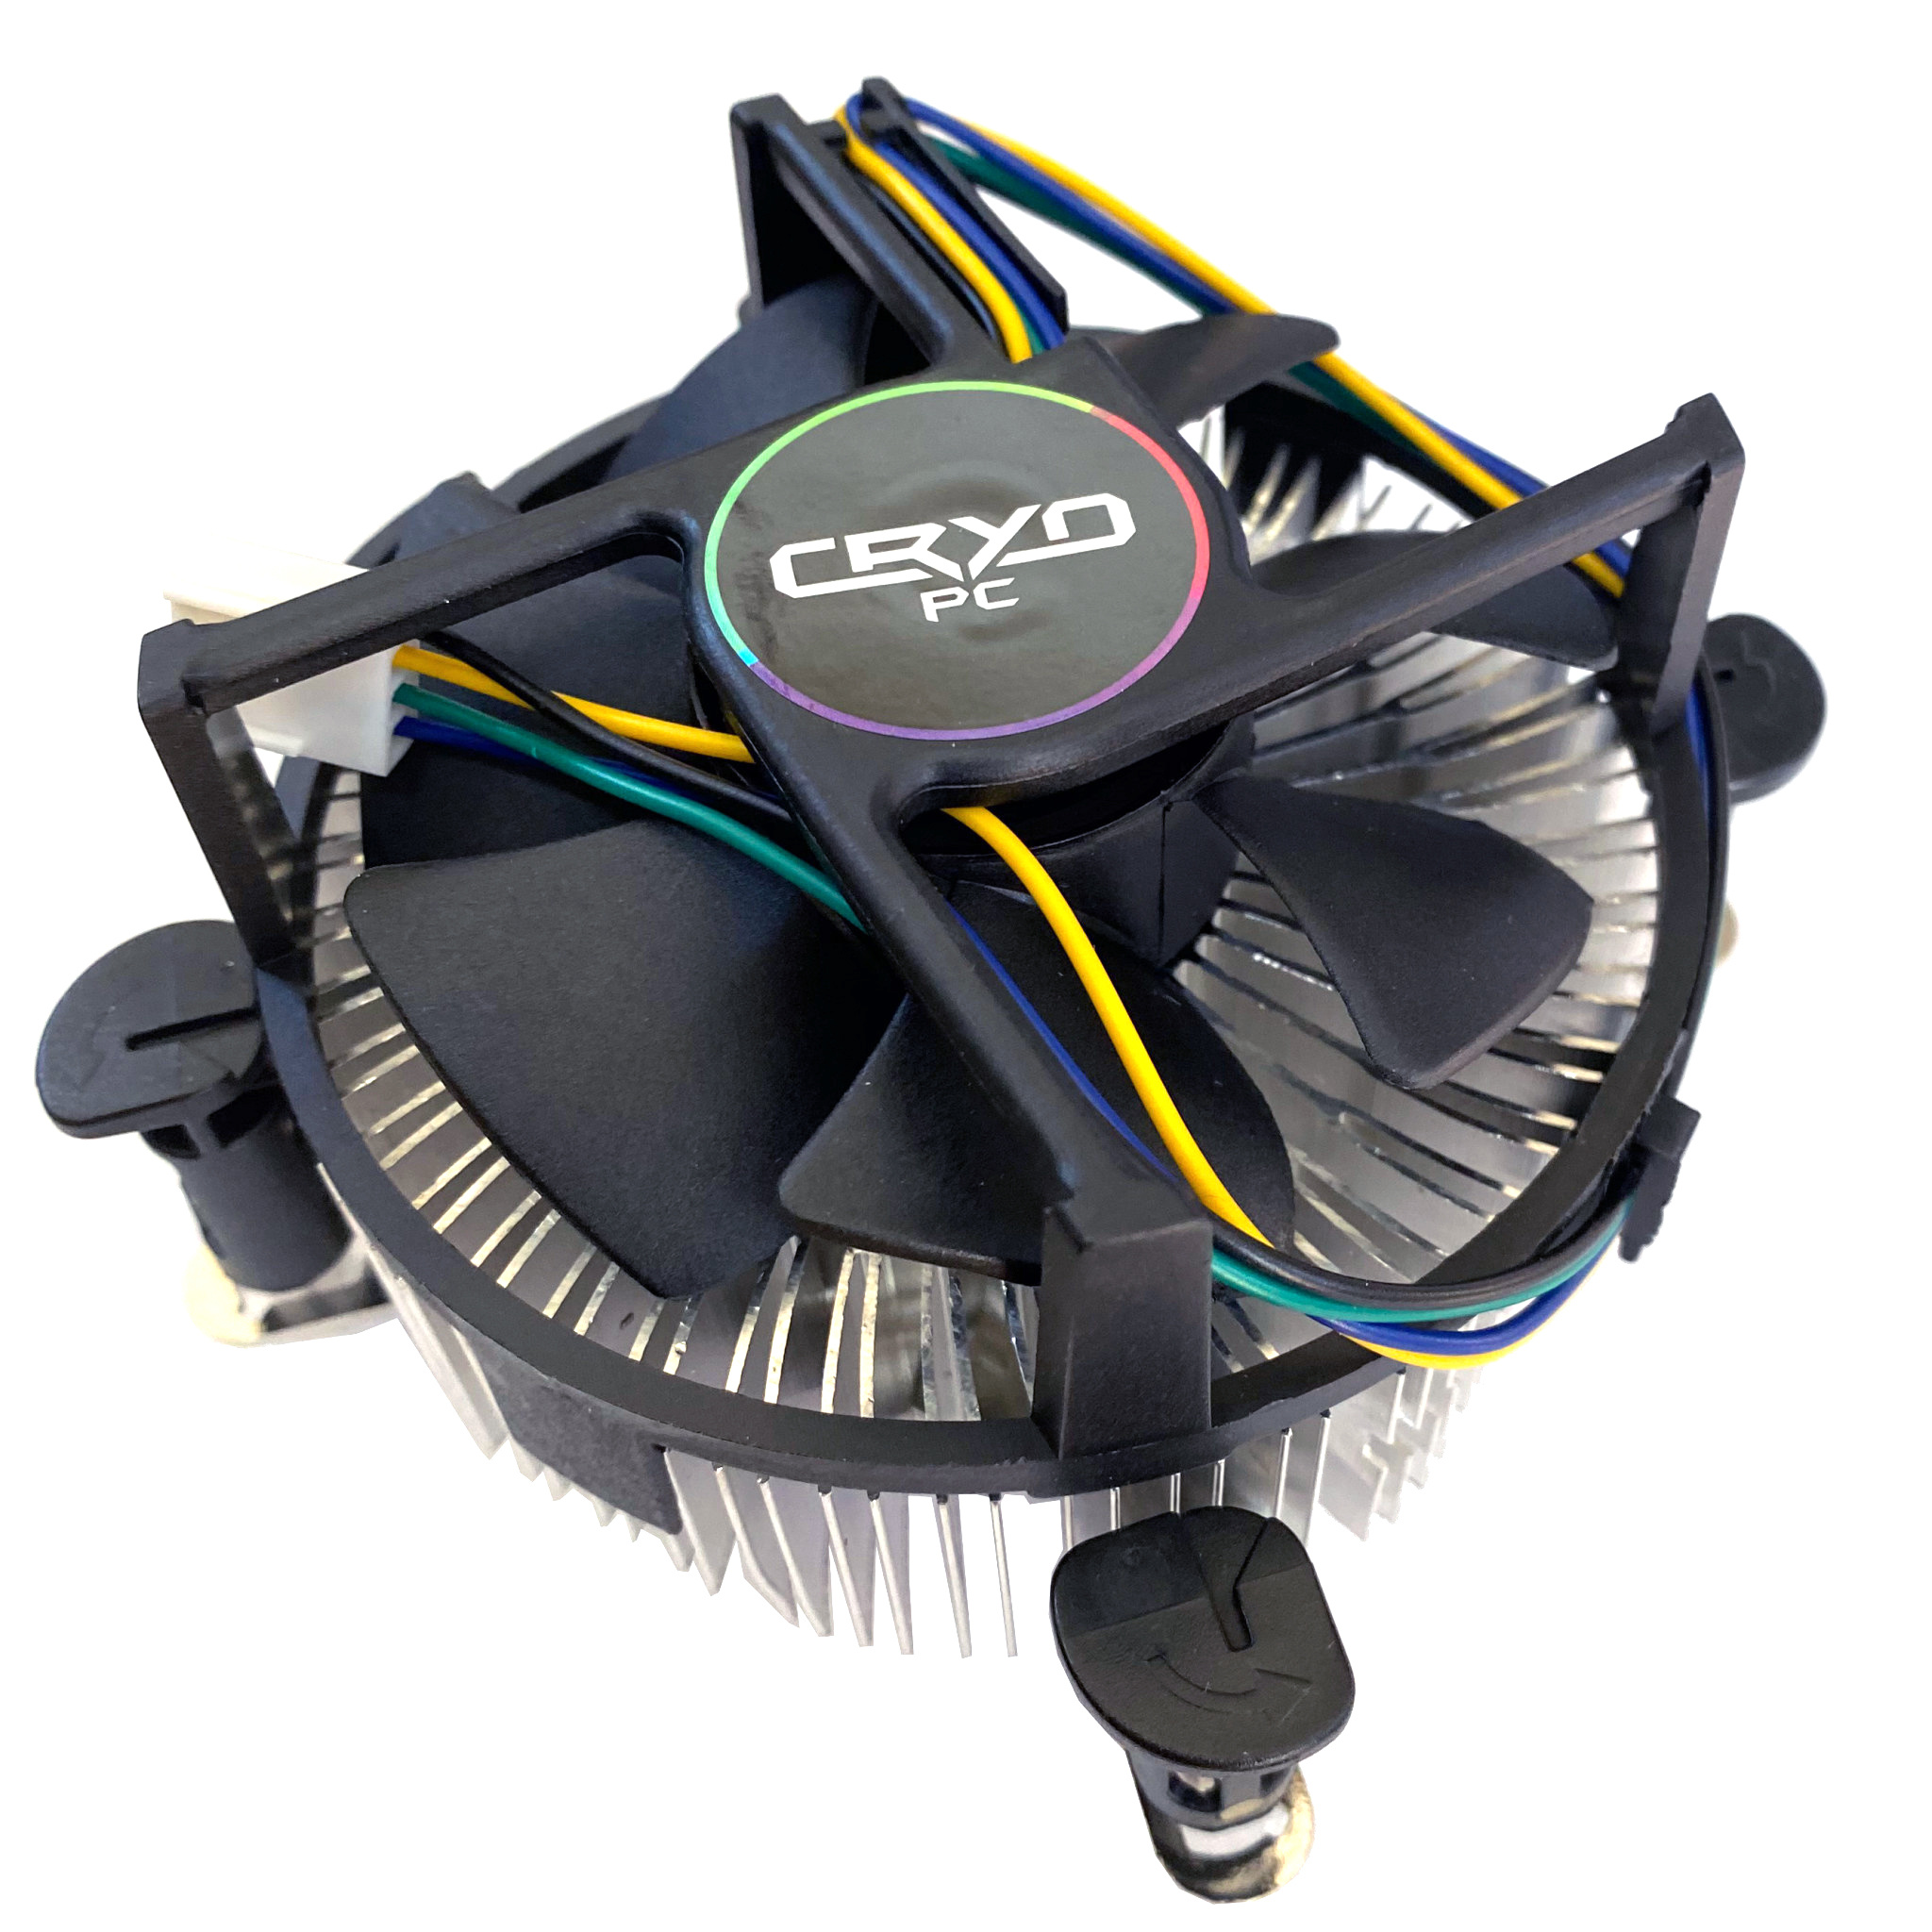 CPC-07500, Low-Profile Intel Stock CPU Cooler with PWM Fan NWCA Inc.